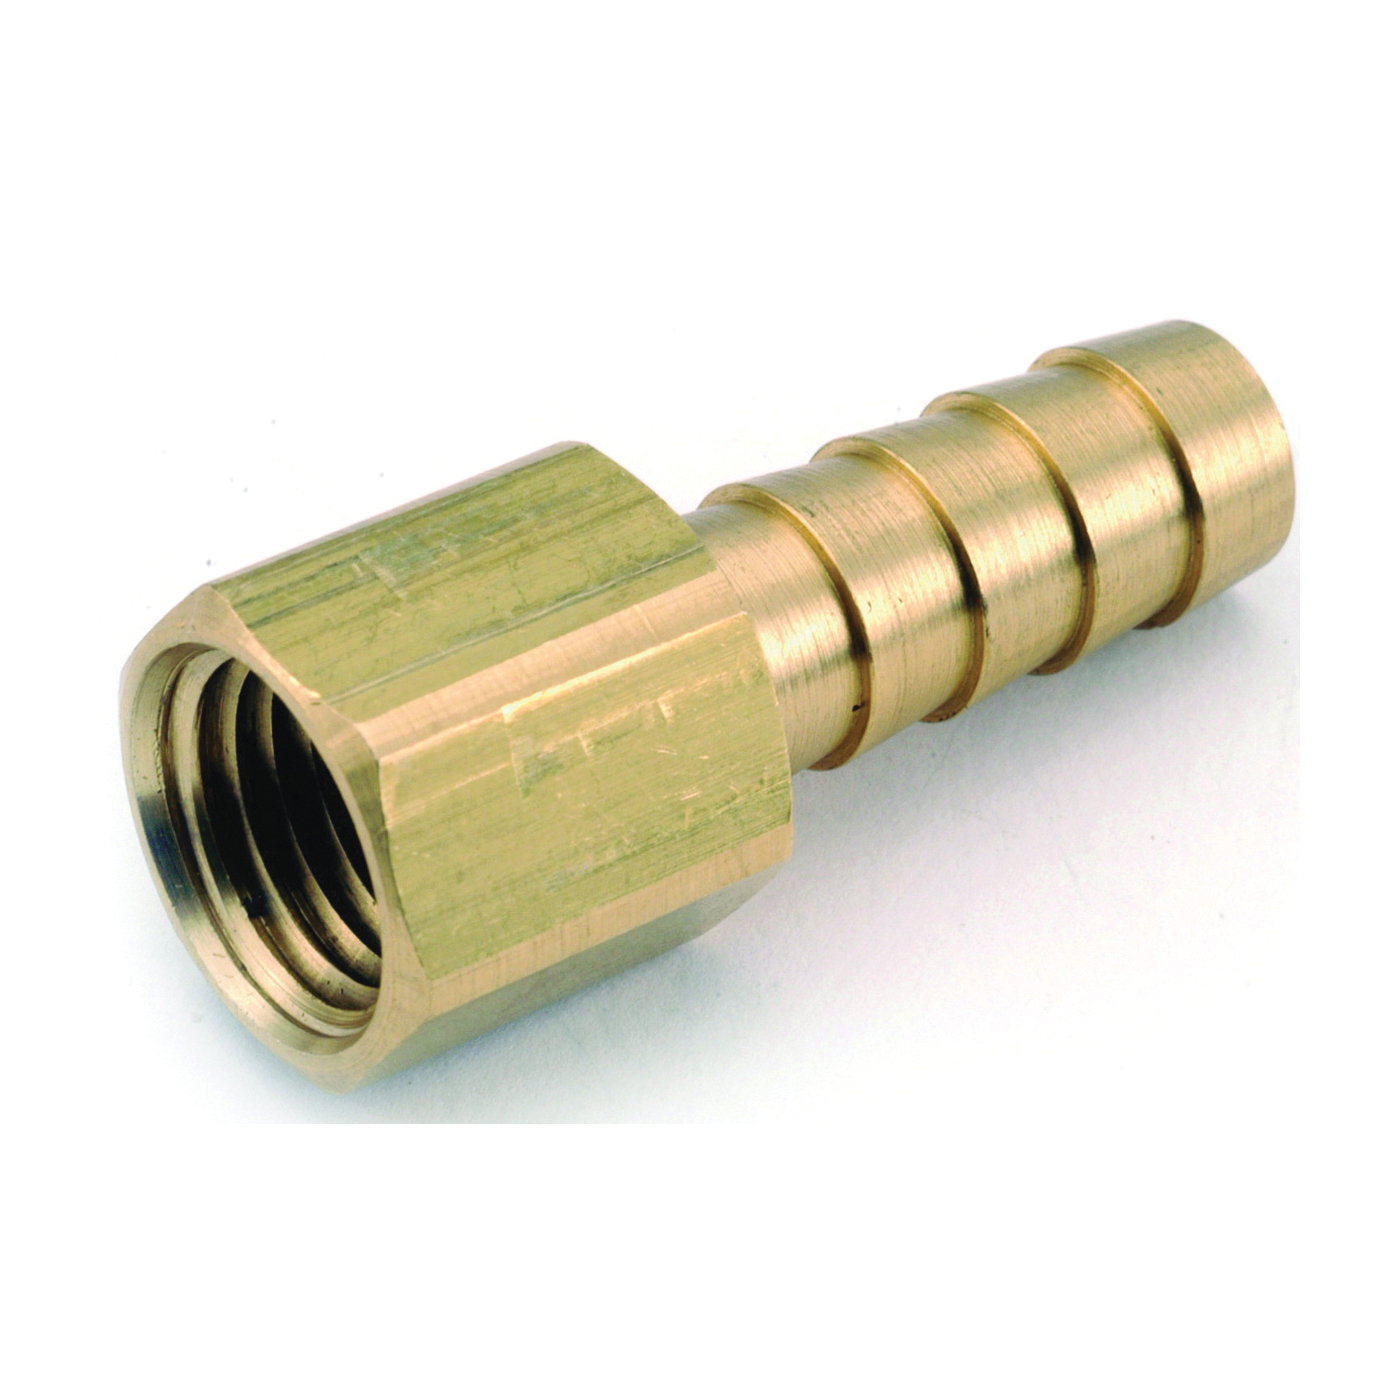 Anderson Metals 129F Series 757002-0806 Hose Adapter, 1/2 in, Barb, 3/8 in, FPT, Brass - 1